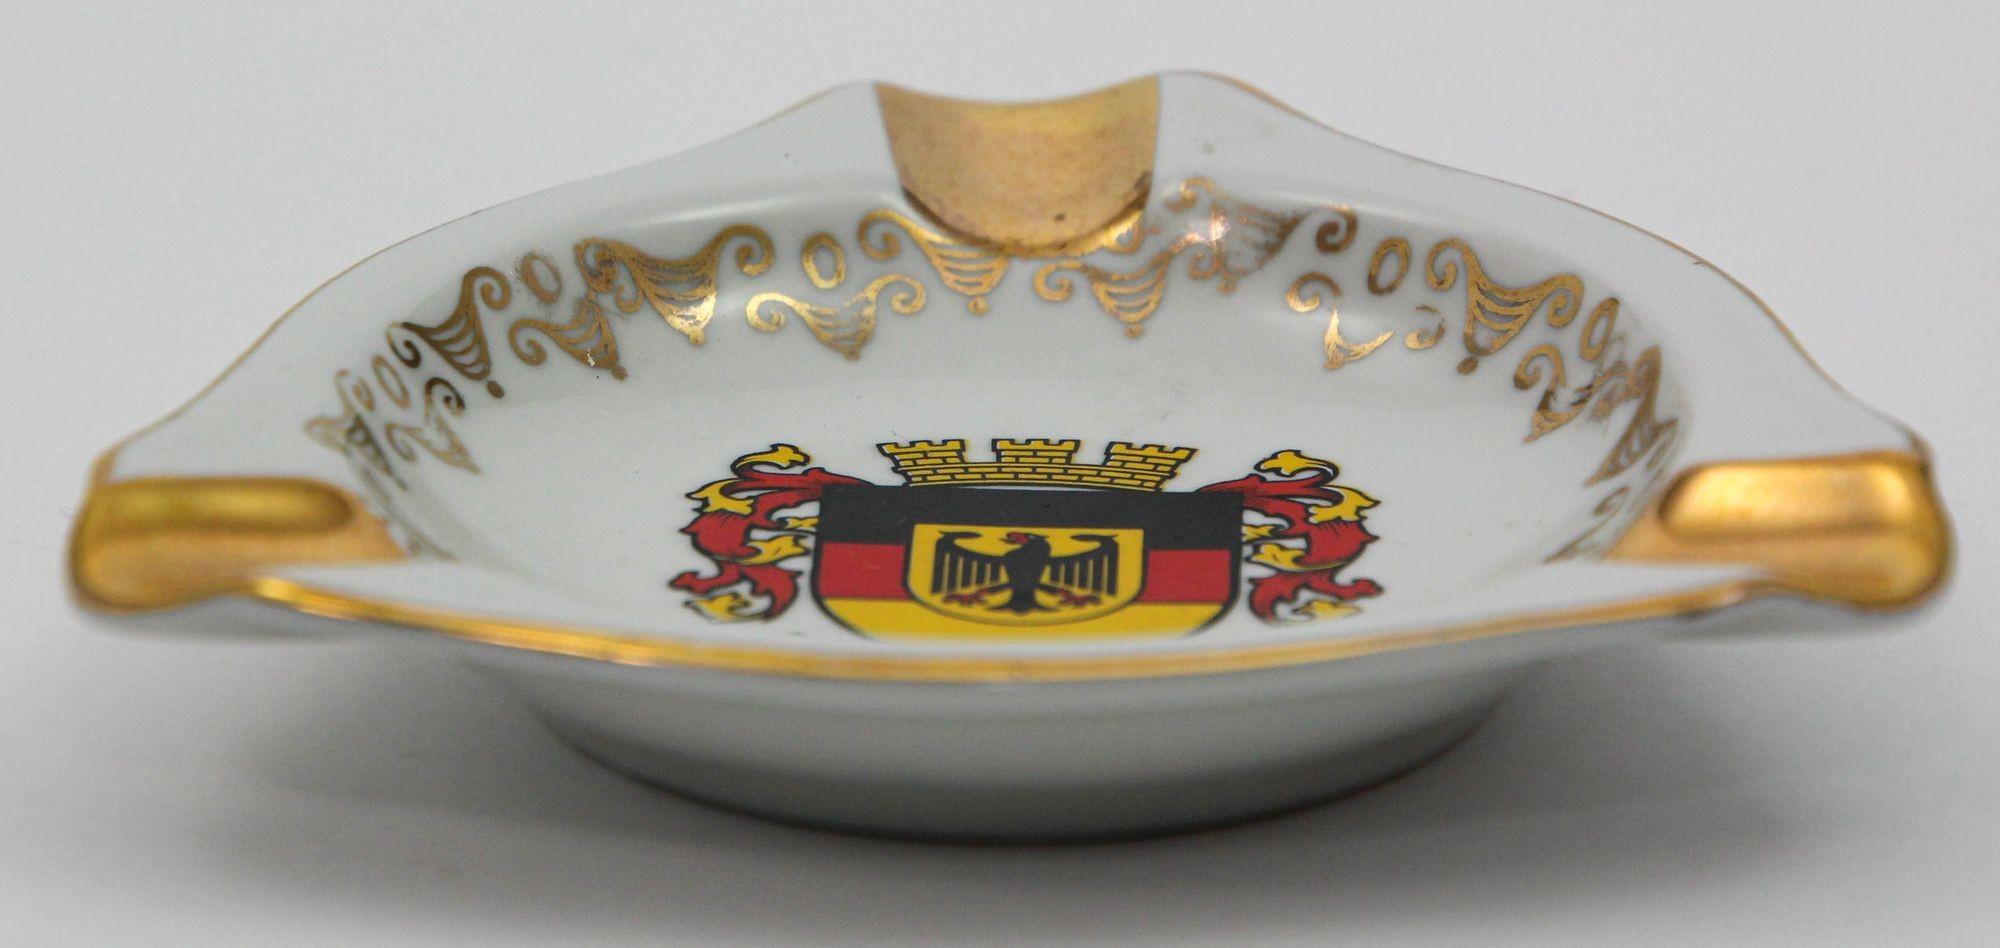 Mid-Century Modern Vintage Made in Germany Souvenir Porcelain Ashtray Collectible Limited Edition For Sale